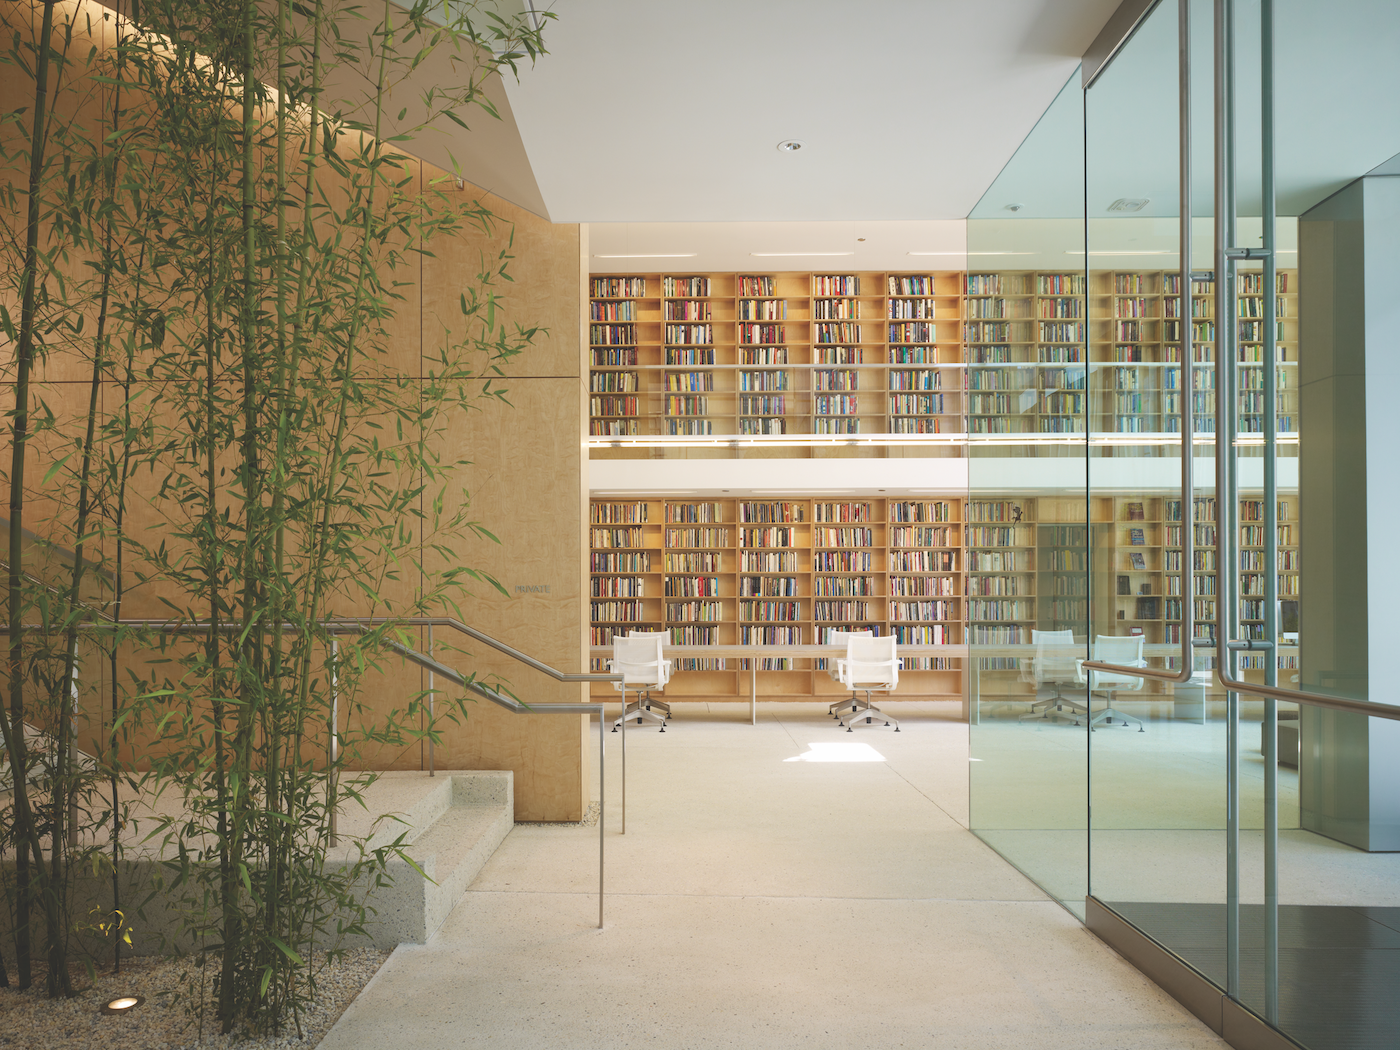 A view into the library in the Poetry Foundation, with bamboo on the left